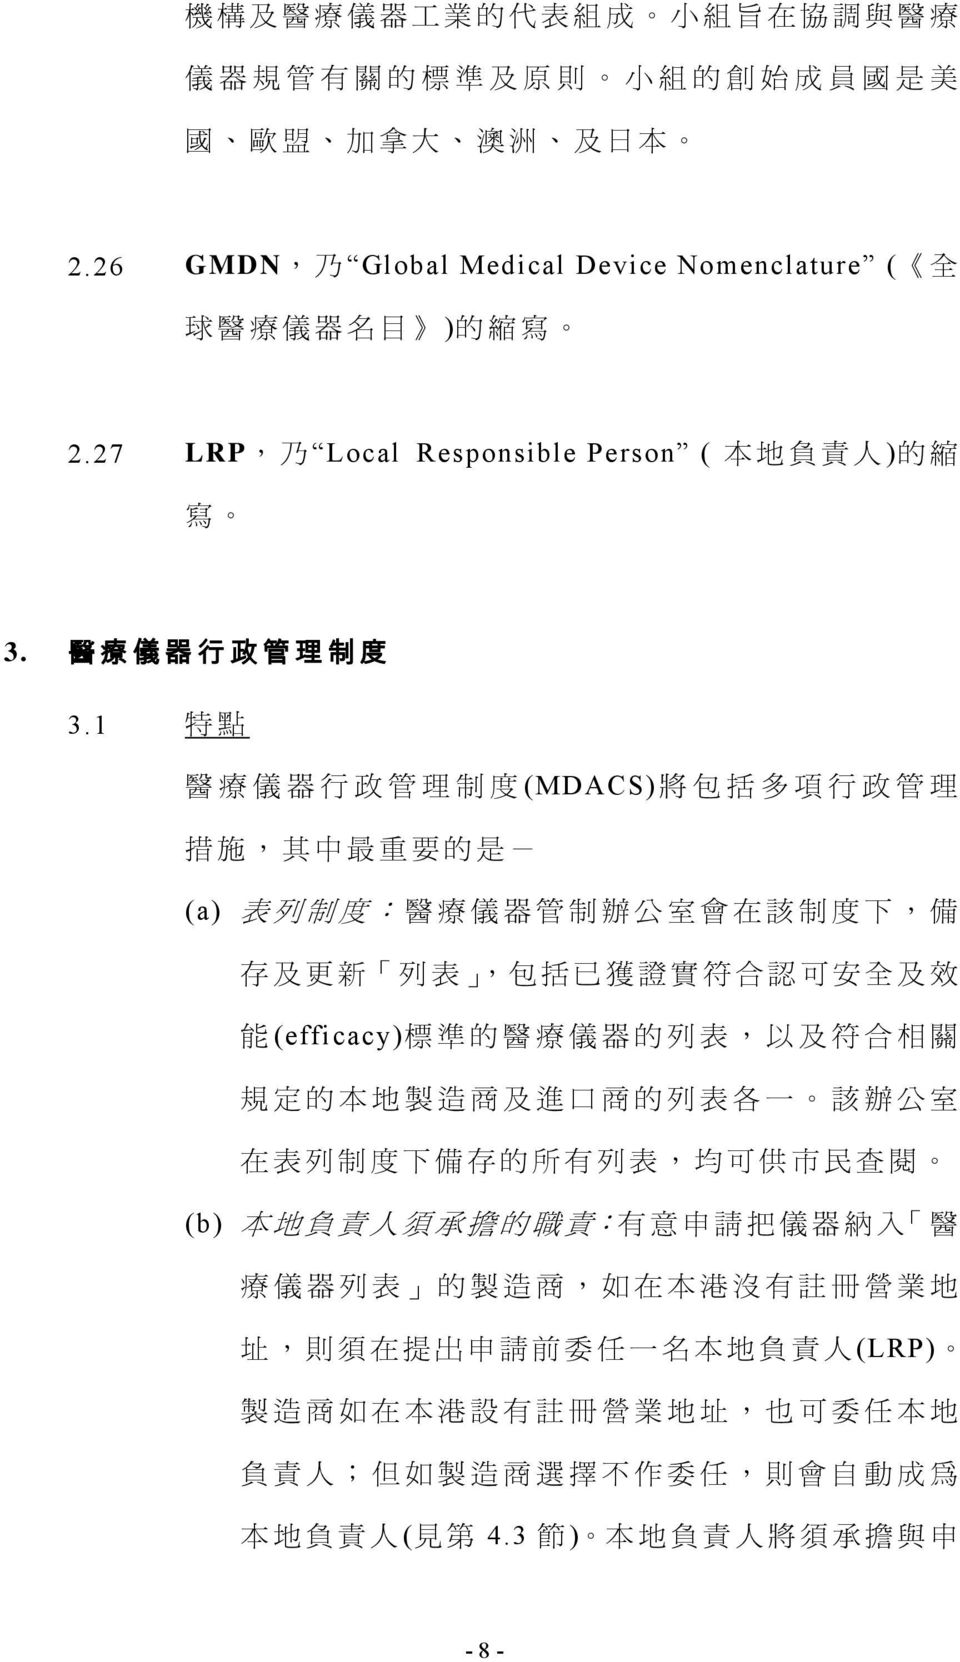 27 LRP Local Responsible Person ( ) 3.